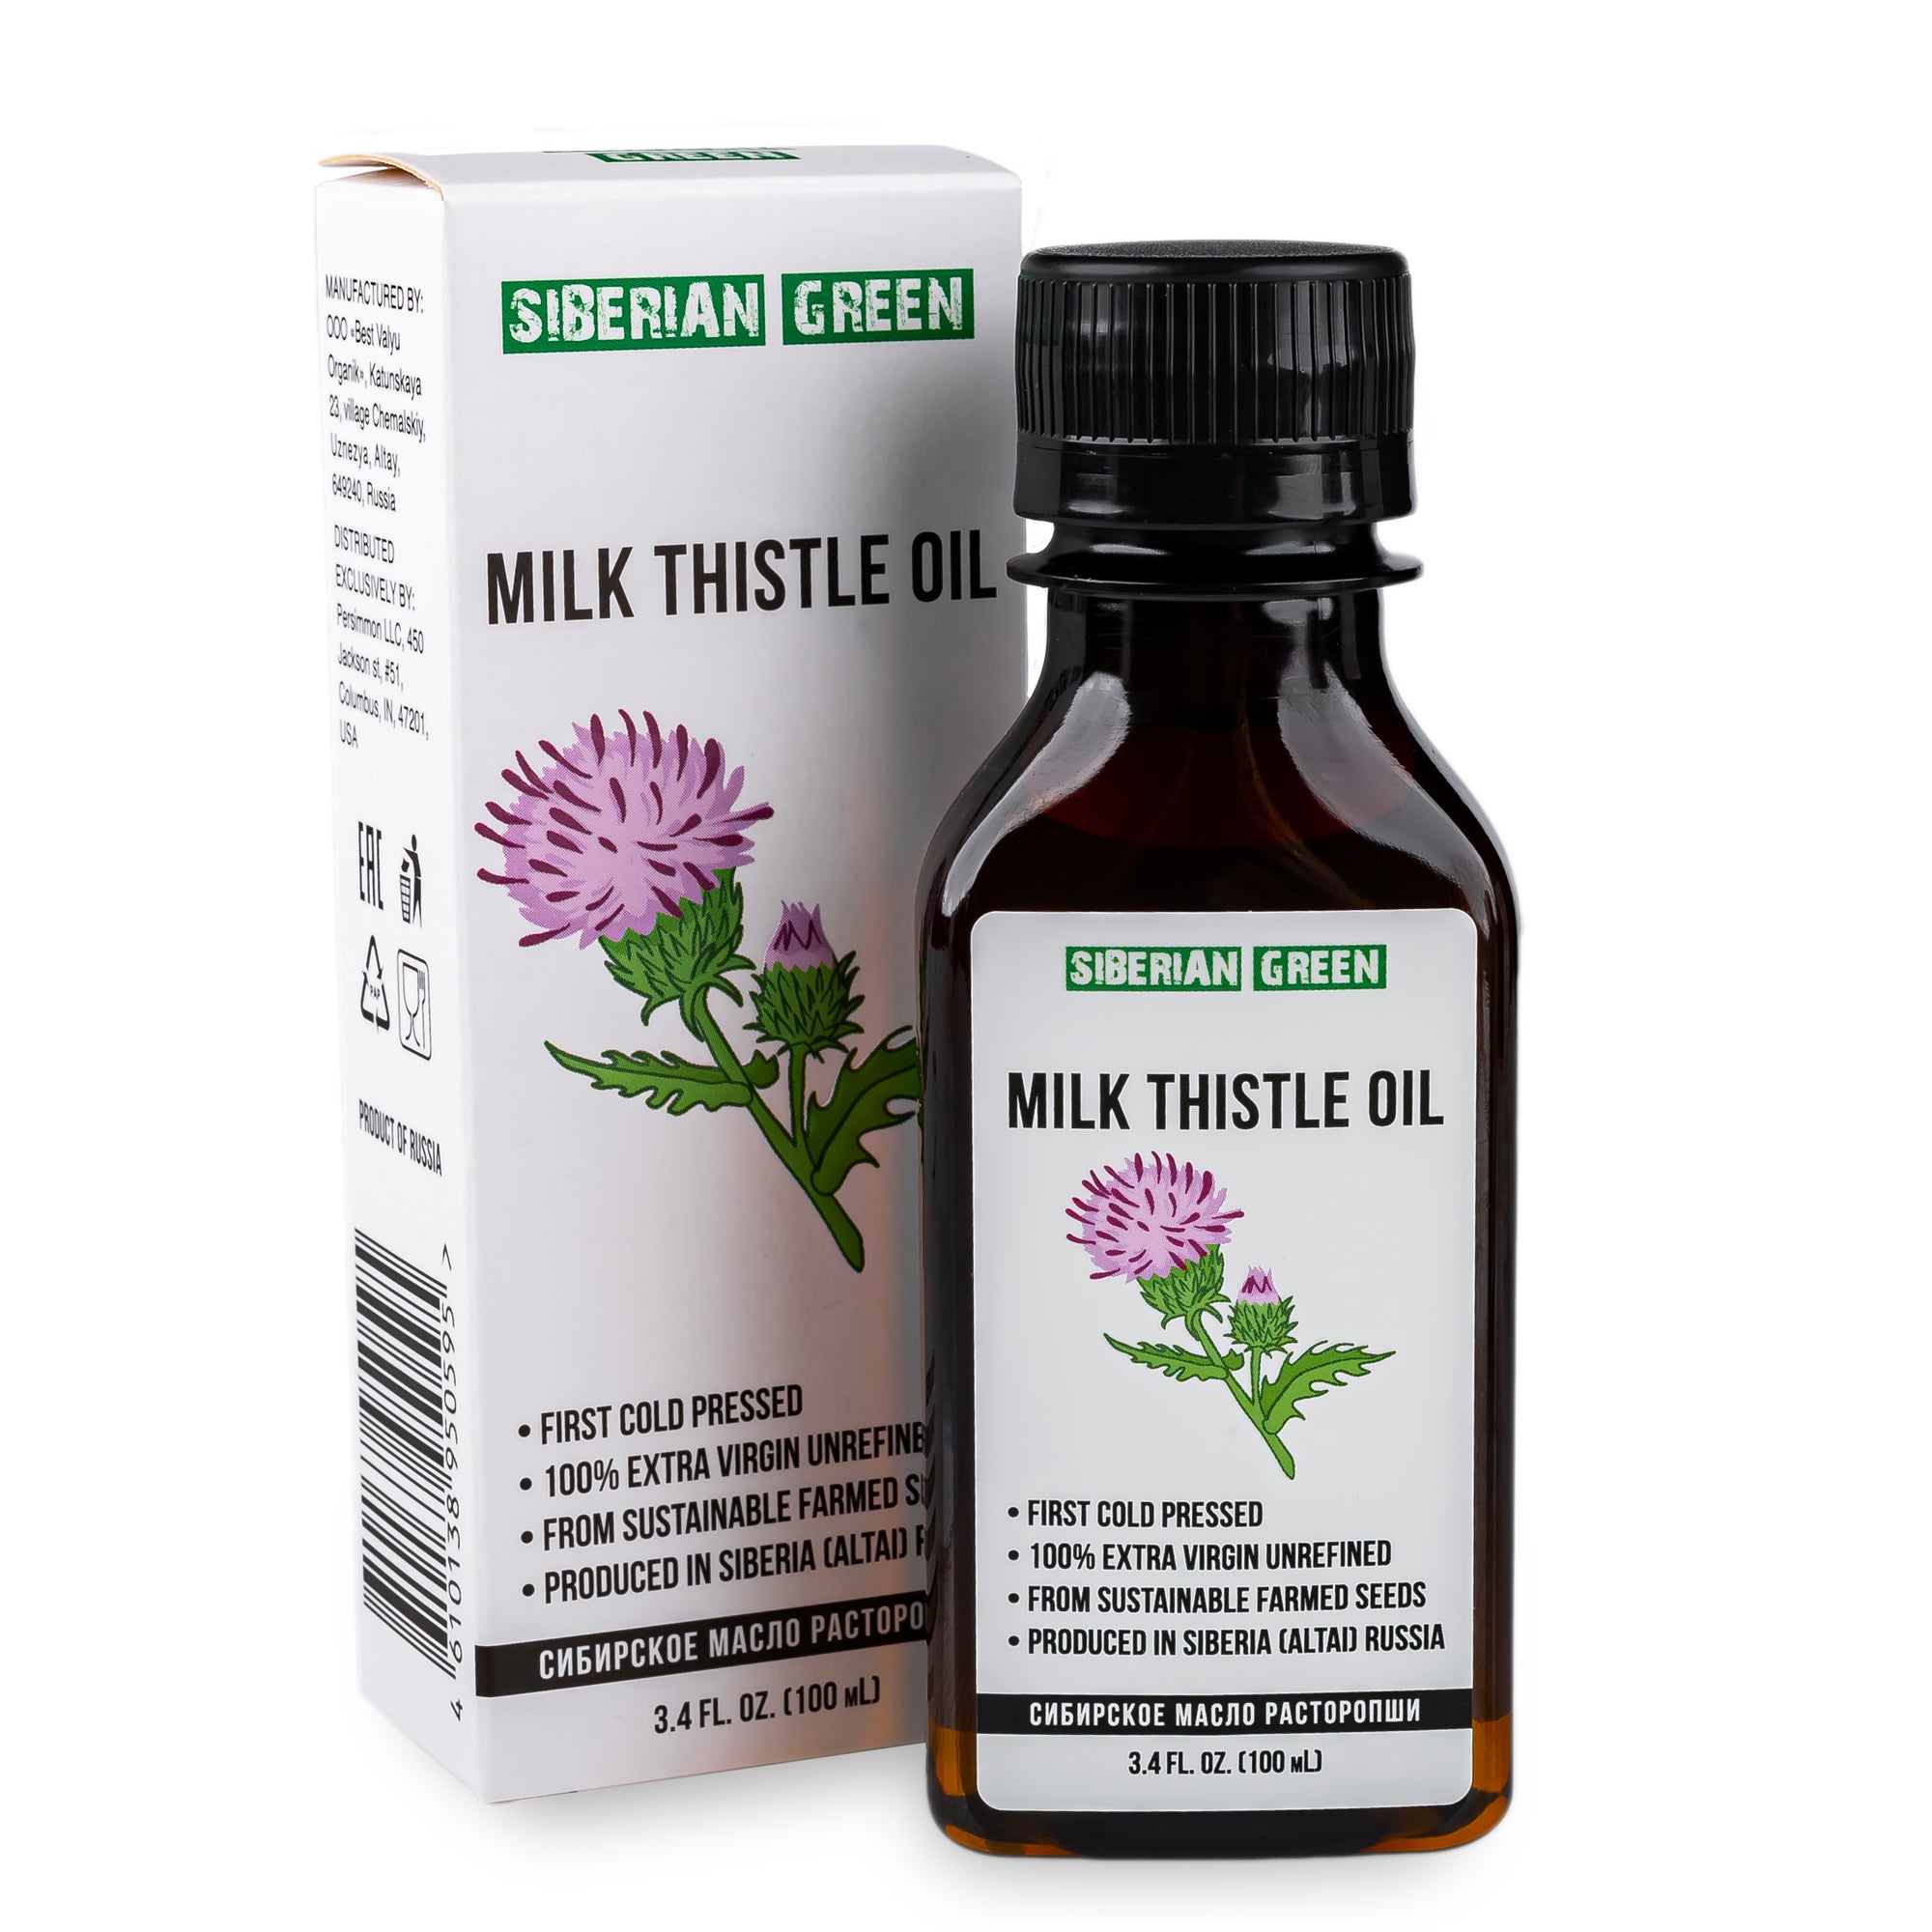 The benefits of Milk Thistle oil from Siberia. How is it better than oil from other places?